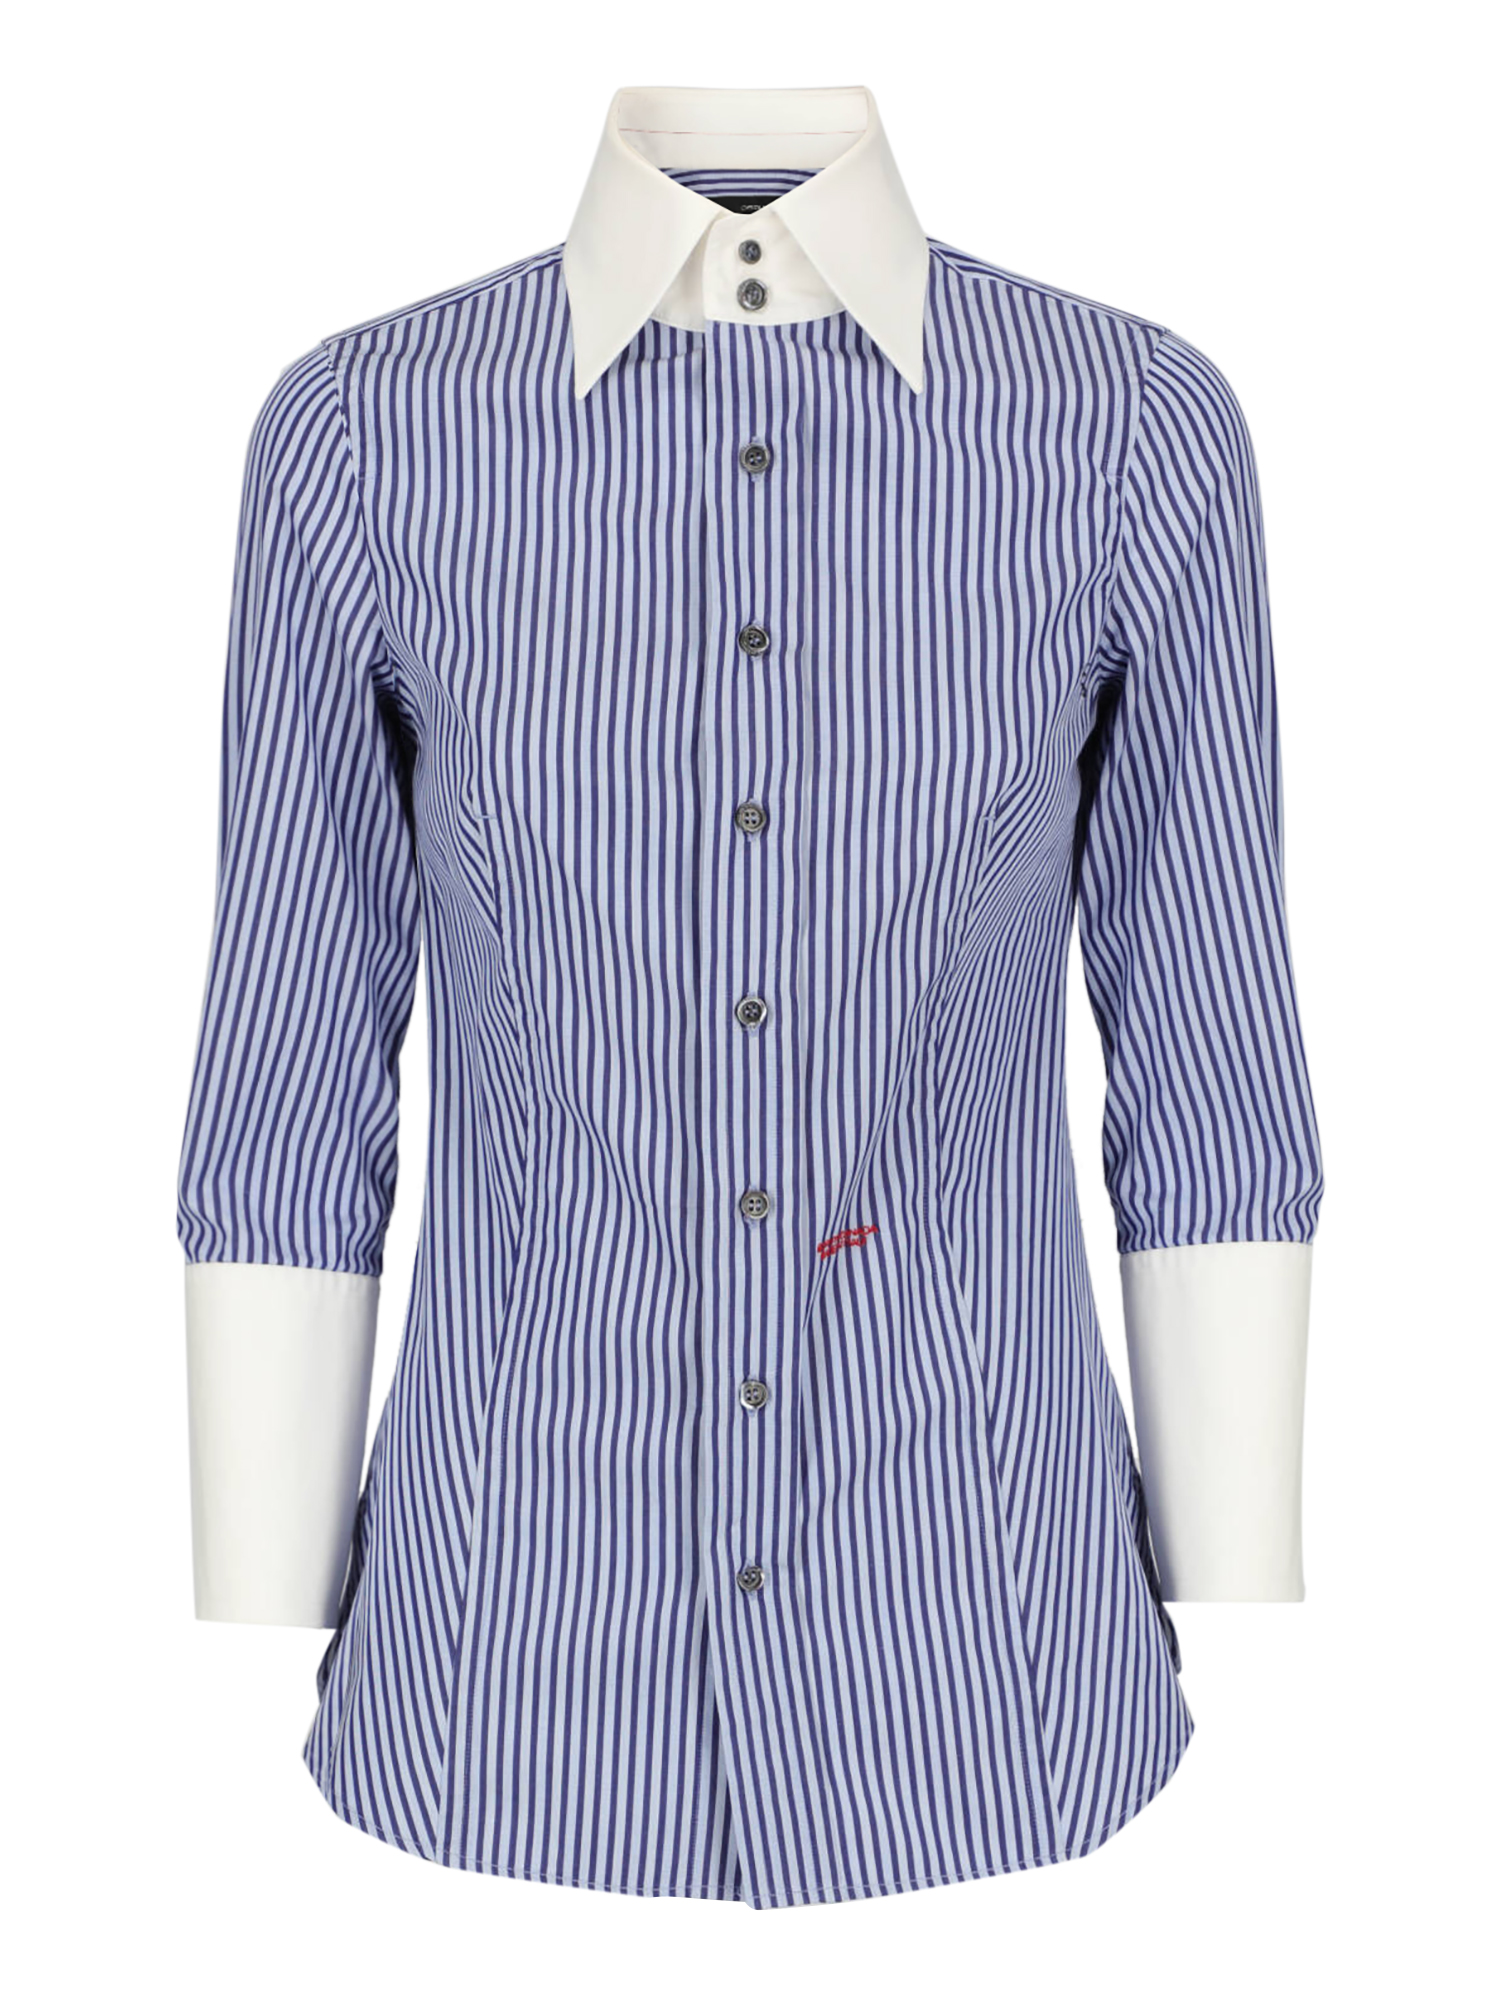 Women's Shirts - Dsquared2 - In Blue, Navy, White Cotton